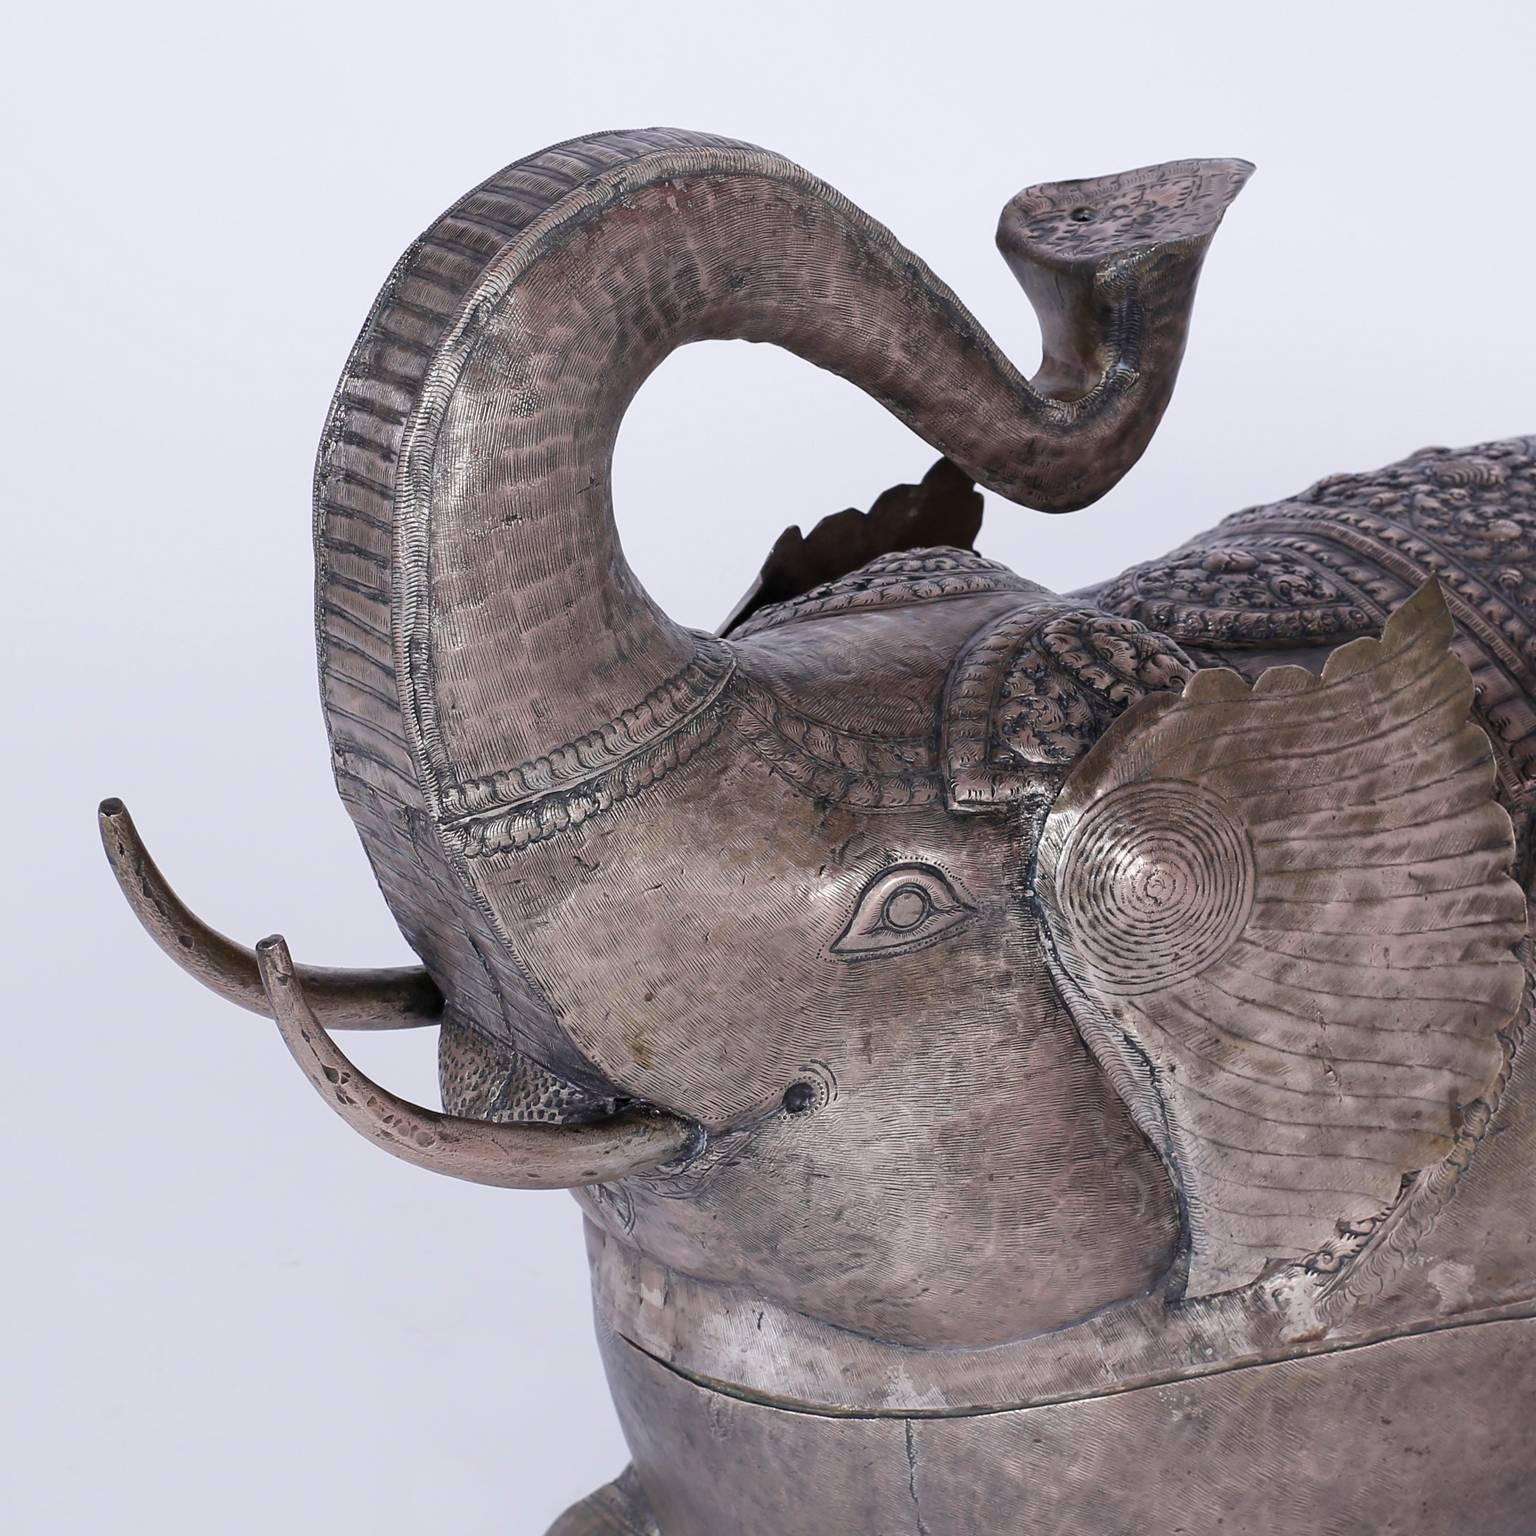 Folky silvered metal elephant handcrafted with a charming whimsical
form hammered and etched designs that unexpectedly opens as a trinket
box.